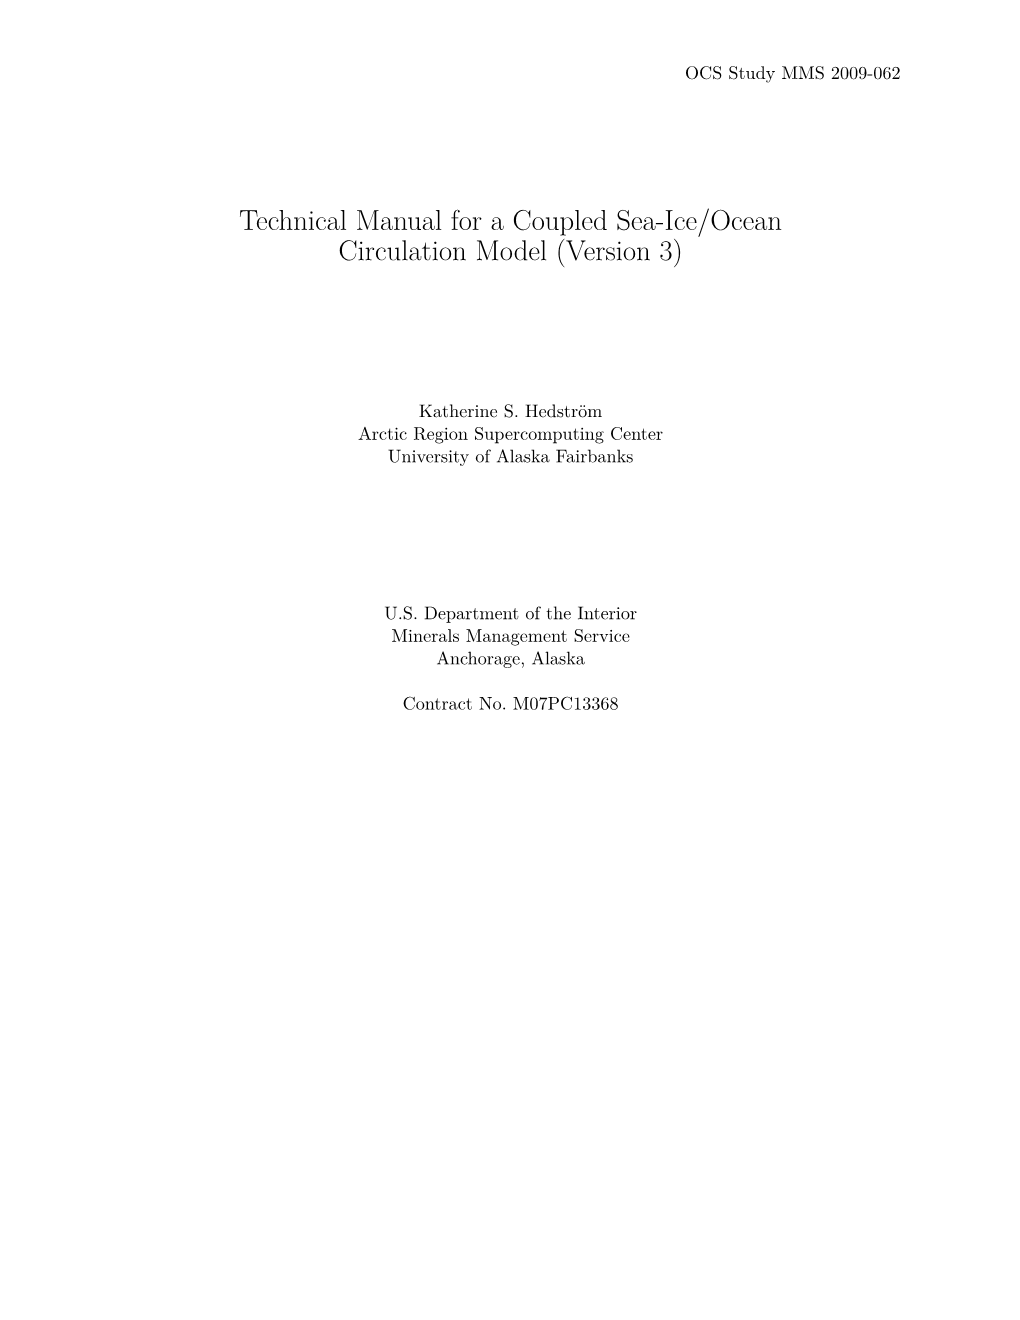 Technical Manual for a Coupled Sea-Ice/Ocean Circulation Model (Version 3)